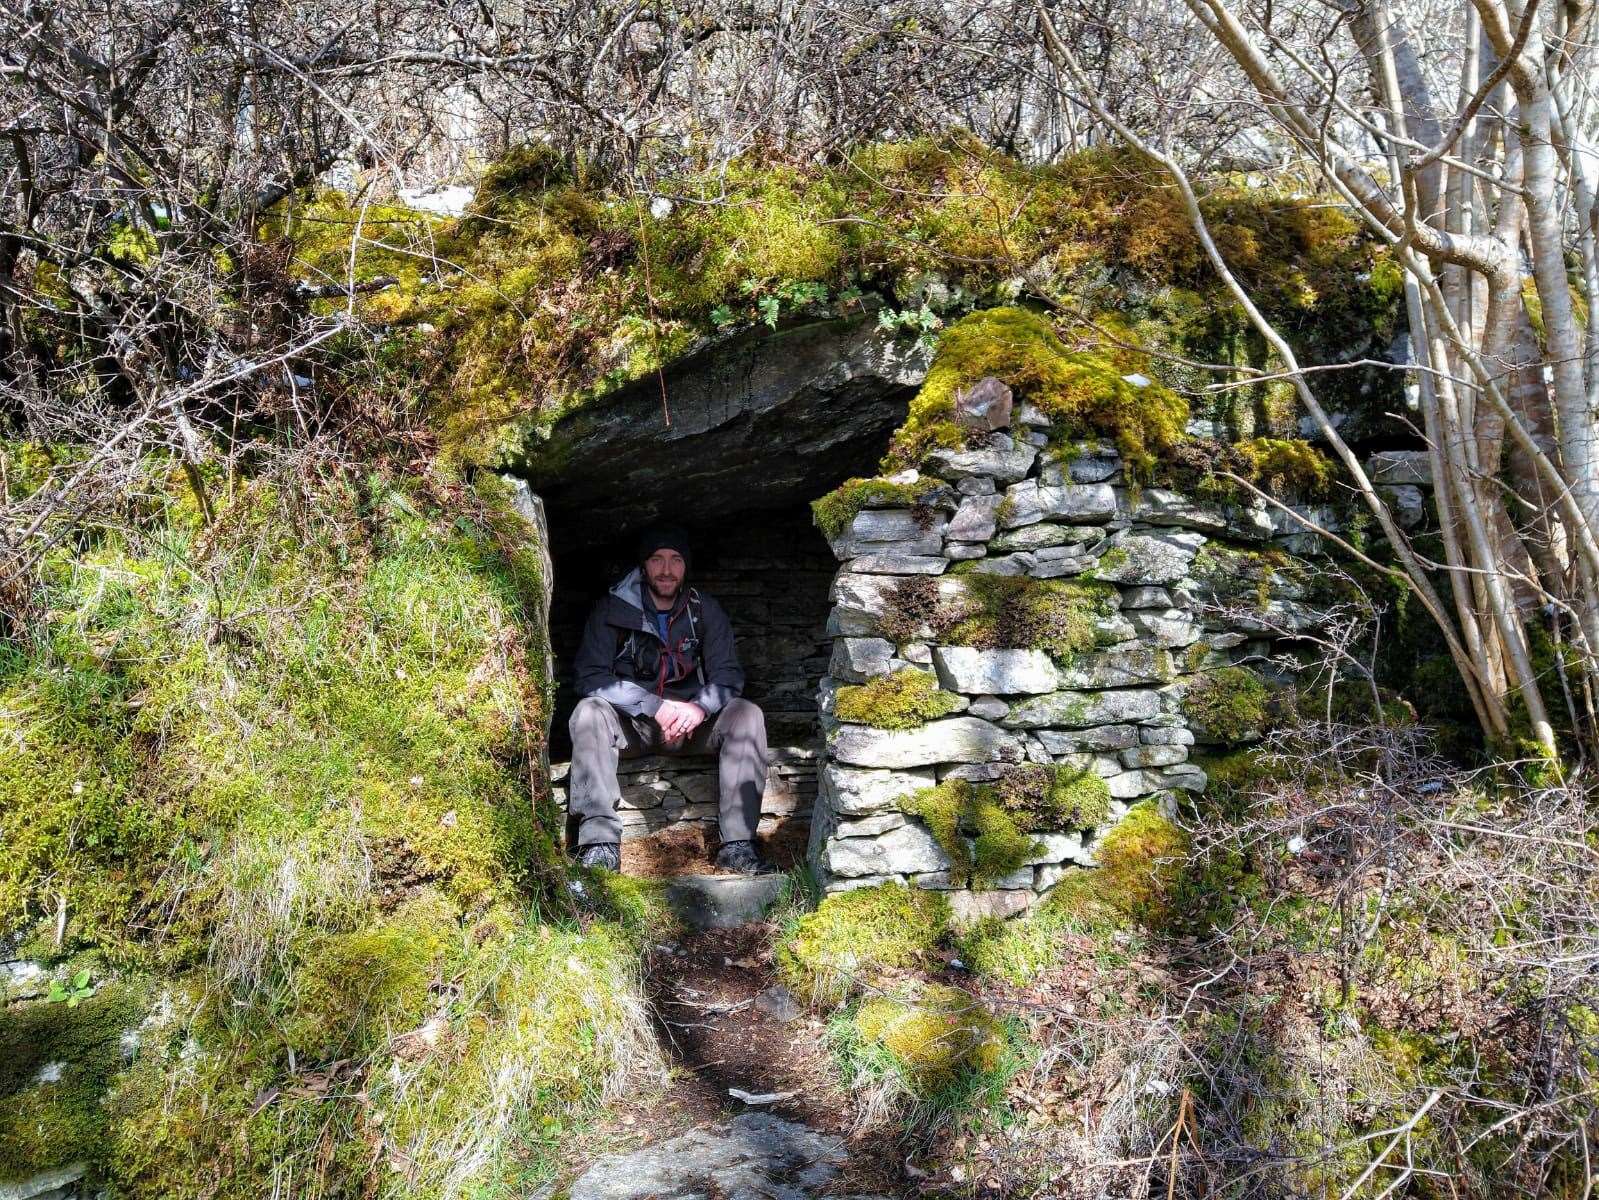 John takes a seat in the stone cave.